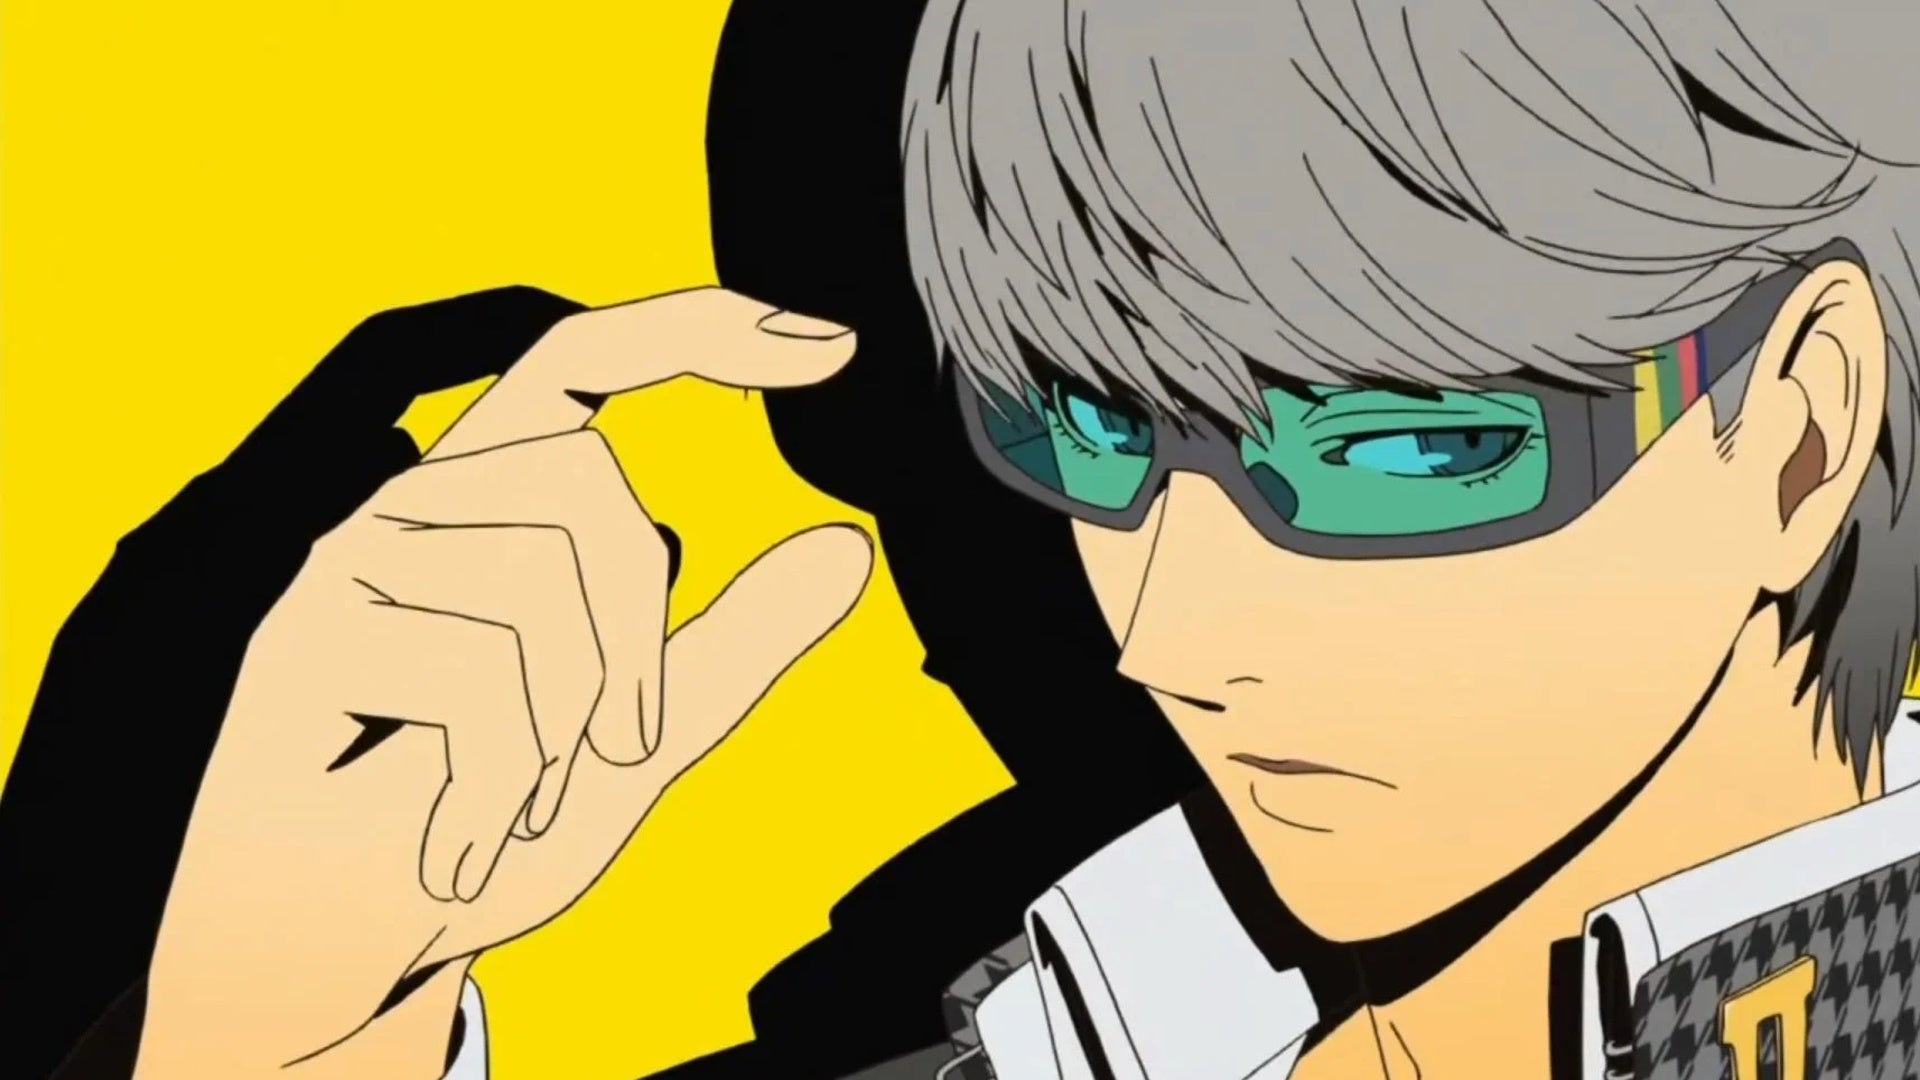 Persona 4 Golden classroom answers: An anime young man with short silver hair, wearing rectangular glasses with green-tinted lenses, is standing against a golden background. His right hand is raised toward the glasses